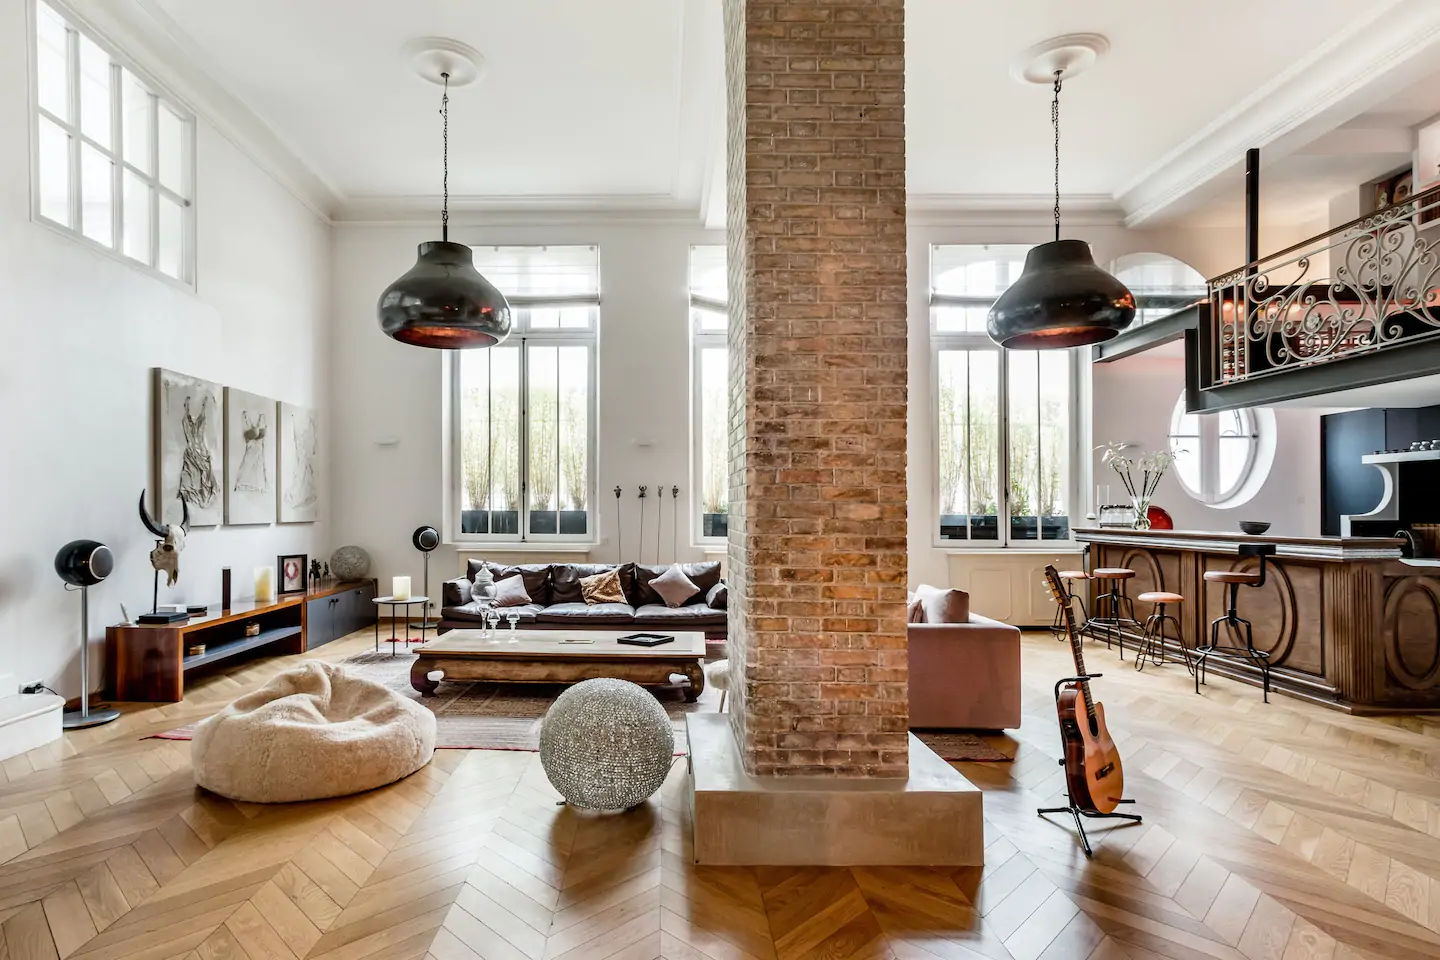 Photo of the living room inside a magnificent loft located in the Latin Quarter that is an Airbnb in Paris.